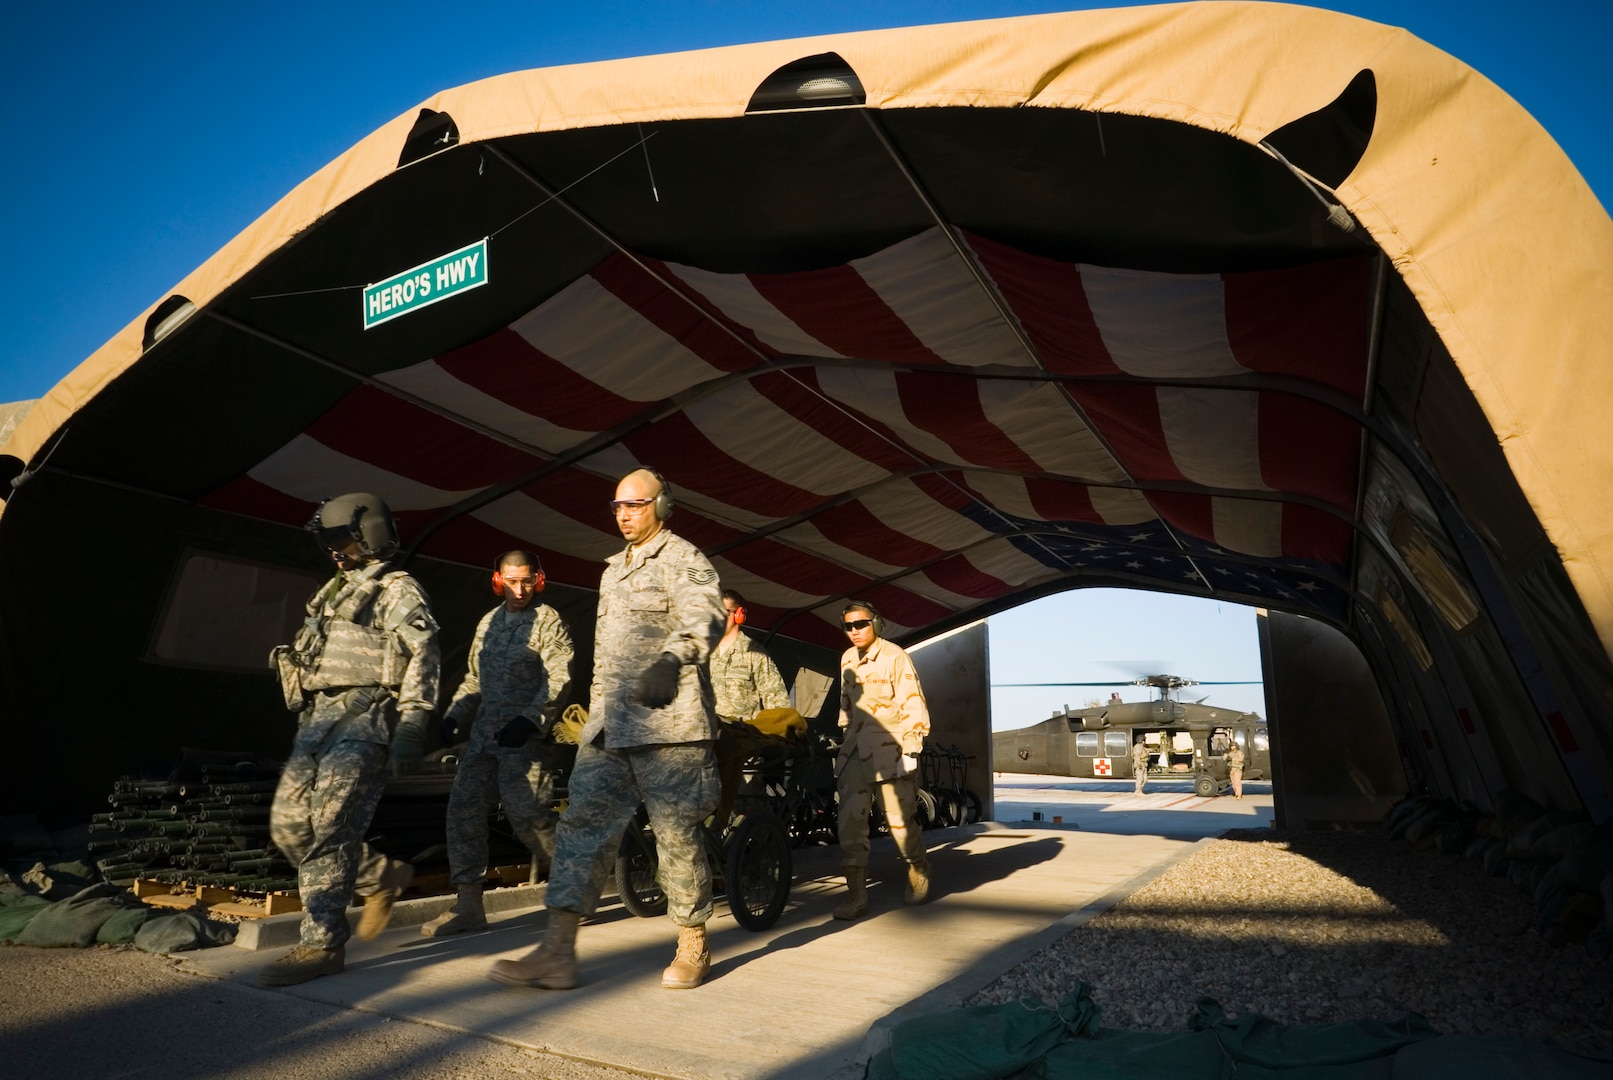 BALAD AIR BASE, Iraq -- Volunteers rush a patient litter through "Hero's Highway" en route to the emergency room at the Air Force Theater Hospital here, Jan. 15. "Hero's Highway" is a canopy that serves as a transition area between the helipad and the AFTH emergency room. The interior roof of the canopy is covered by a huge American flag that signals to wounded troops that they are safe. The flag was donated by the cadets of the Marion Military Institute. (U.S. Air Force Photo/Master Sgt. John R. Nimmo, Sr.)